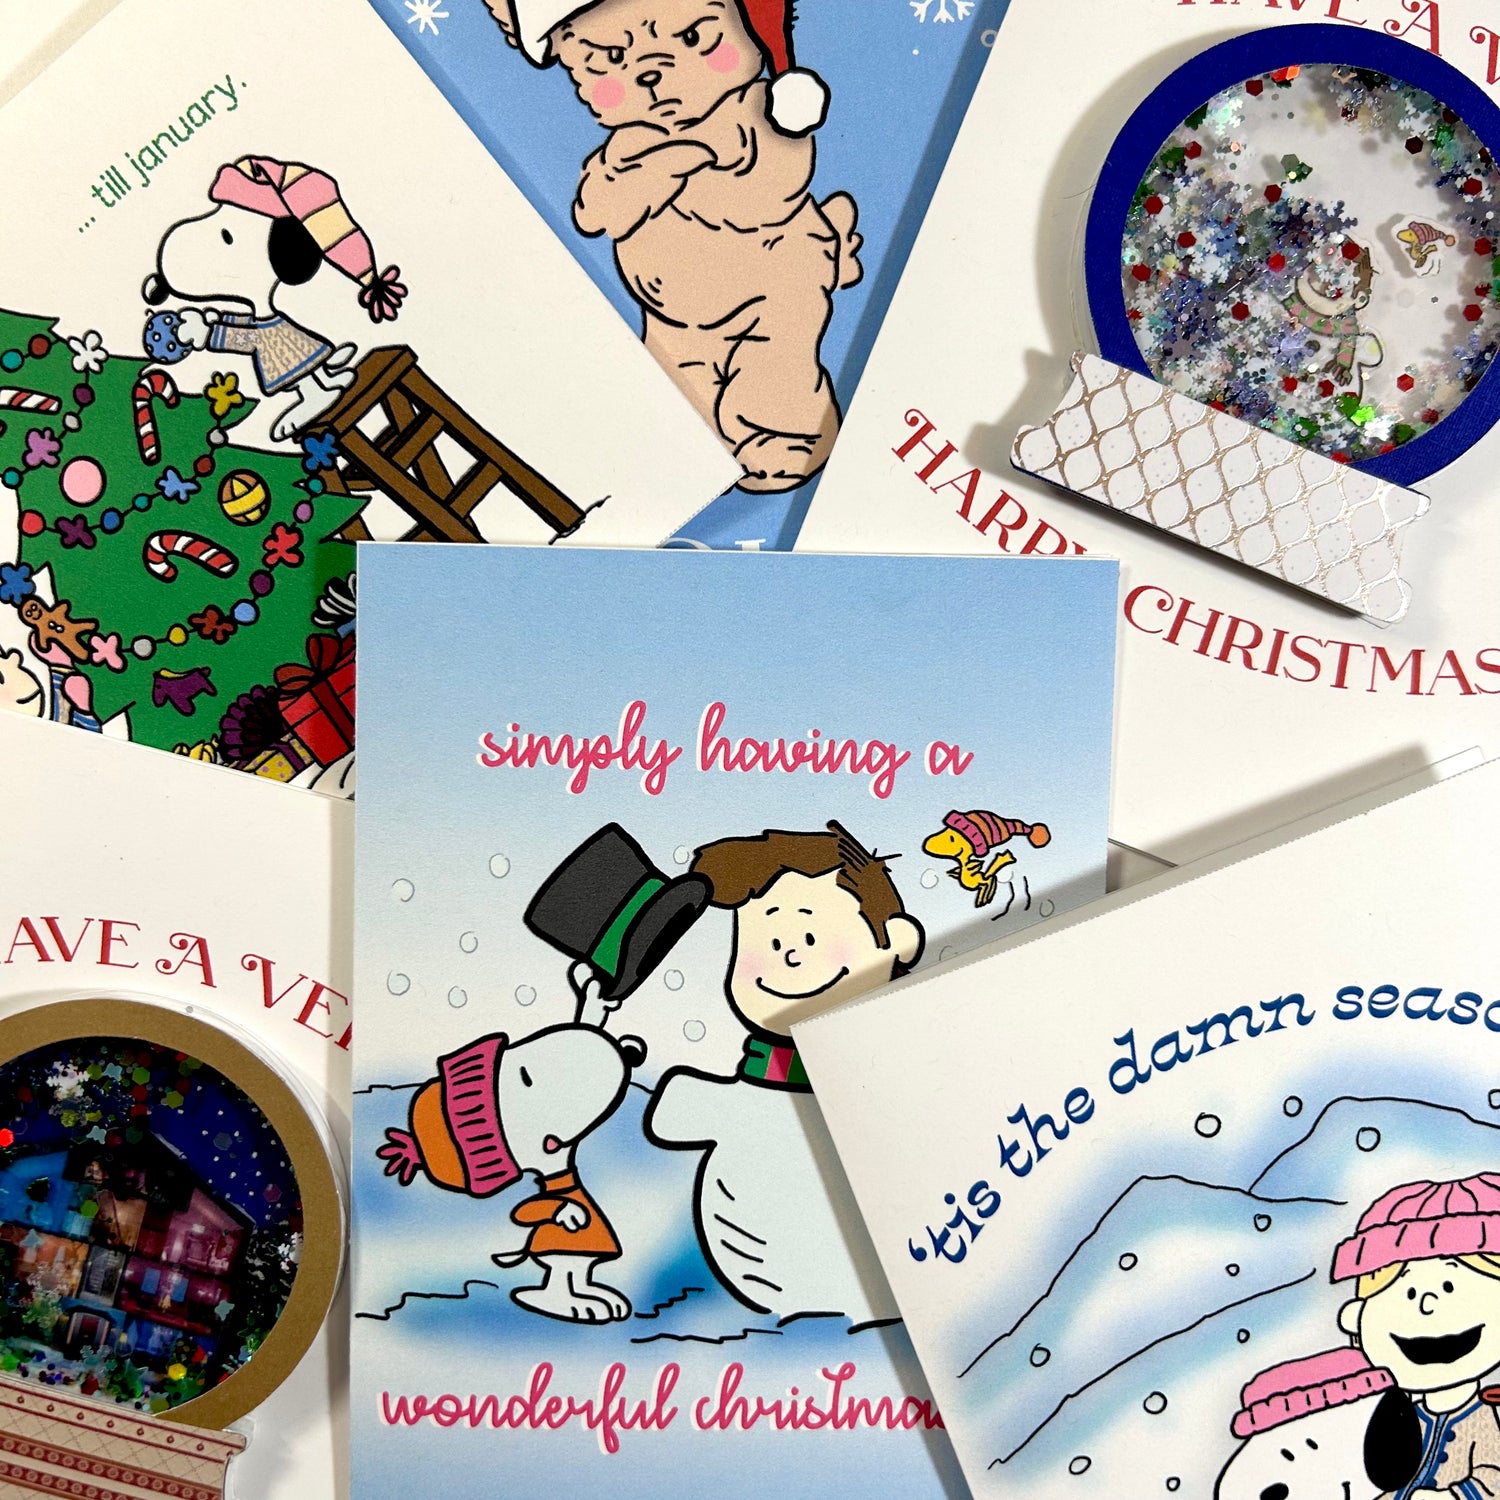 Greeting Cards & More!